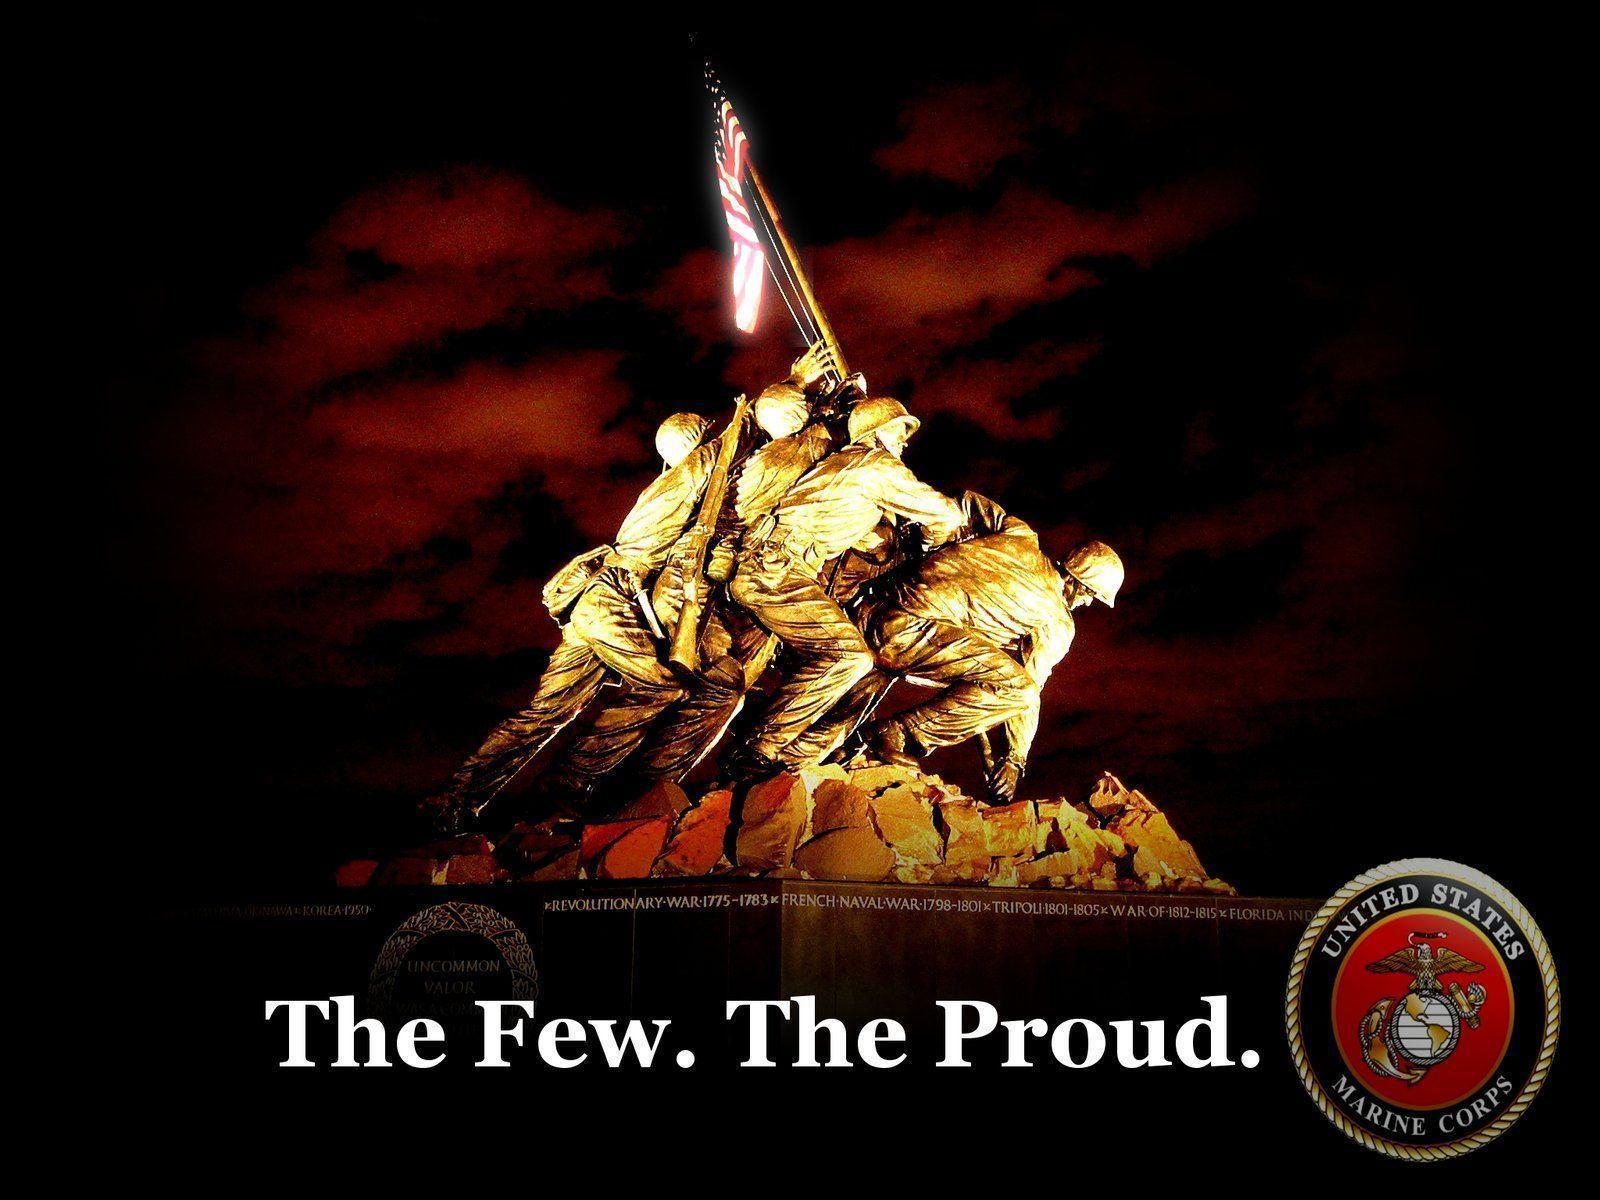 Us Marine Corps Wallpaper and Background